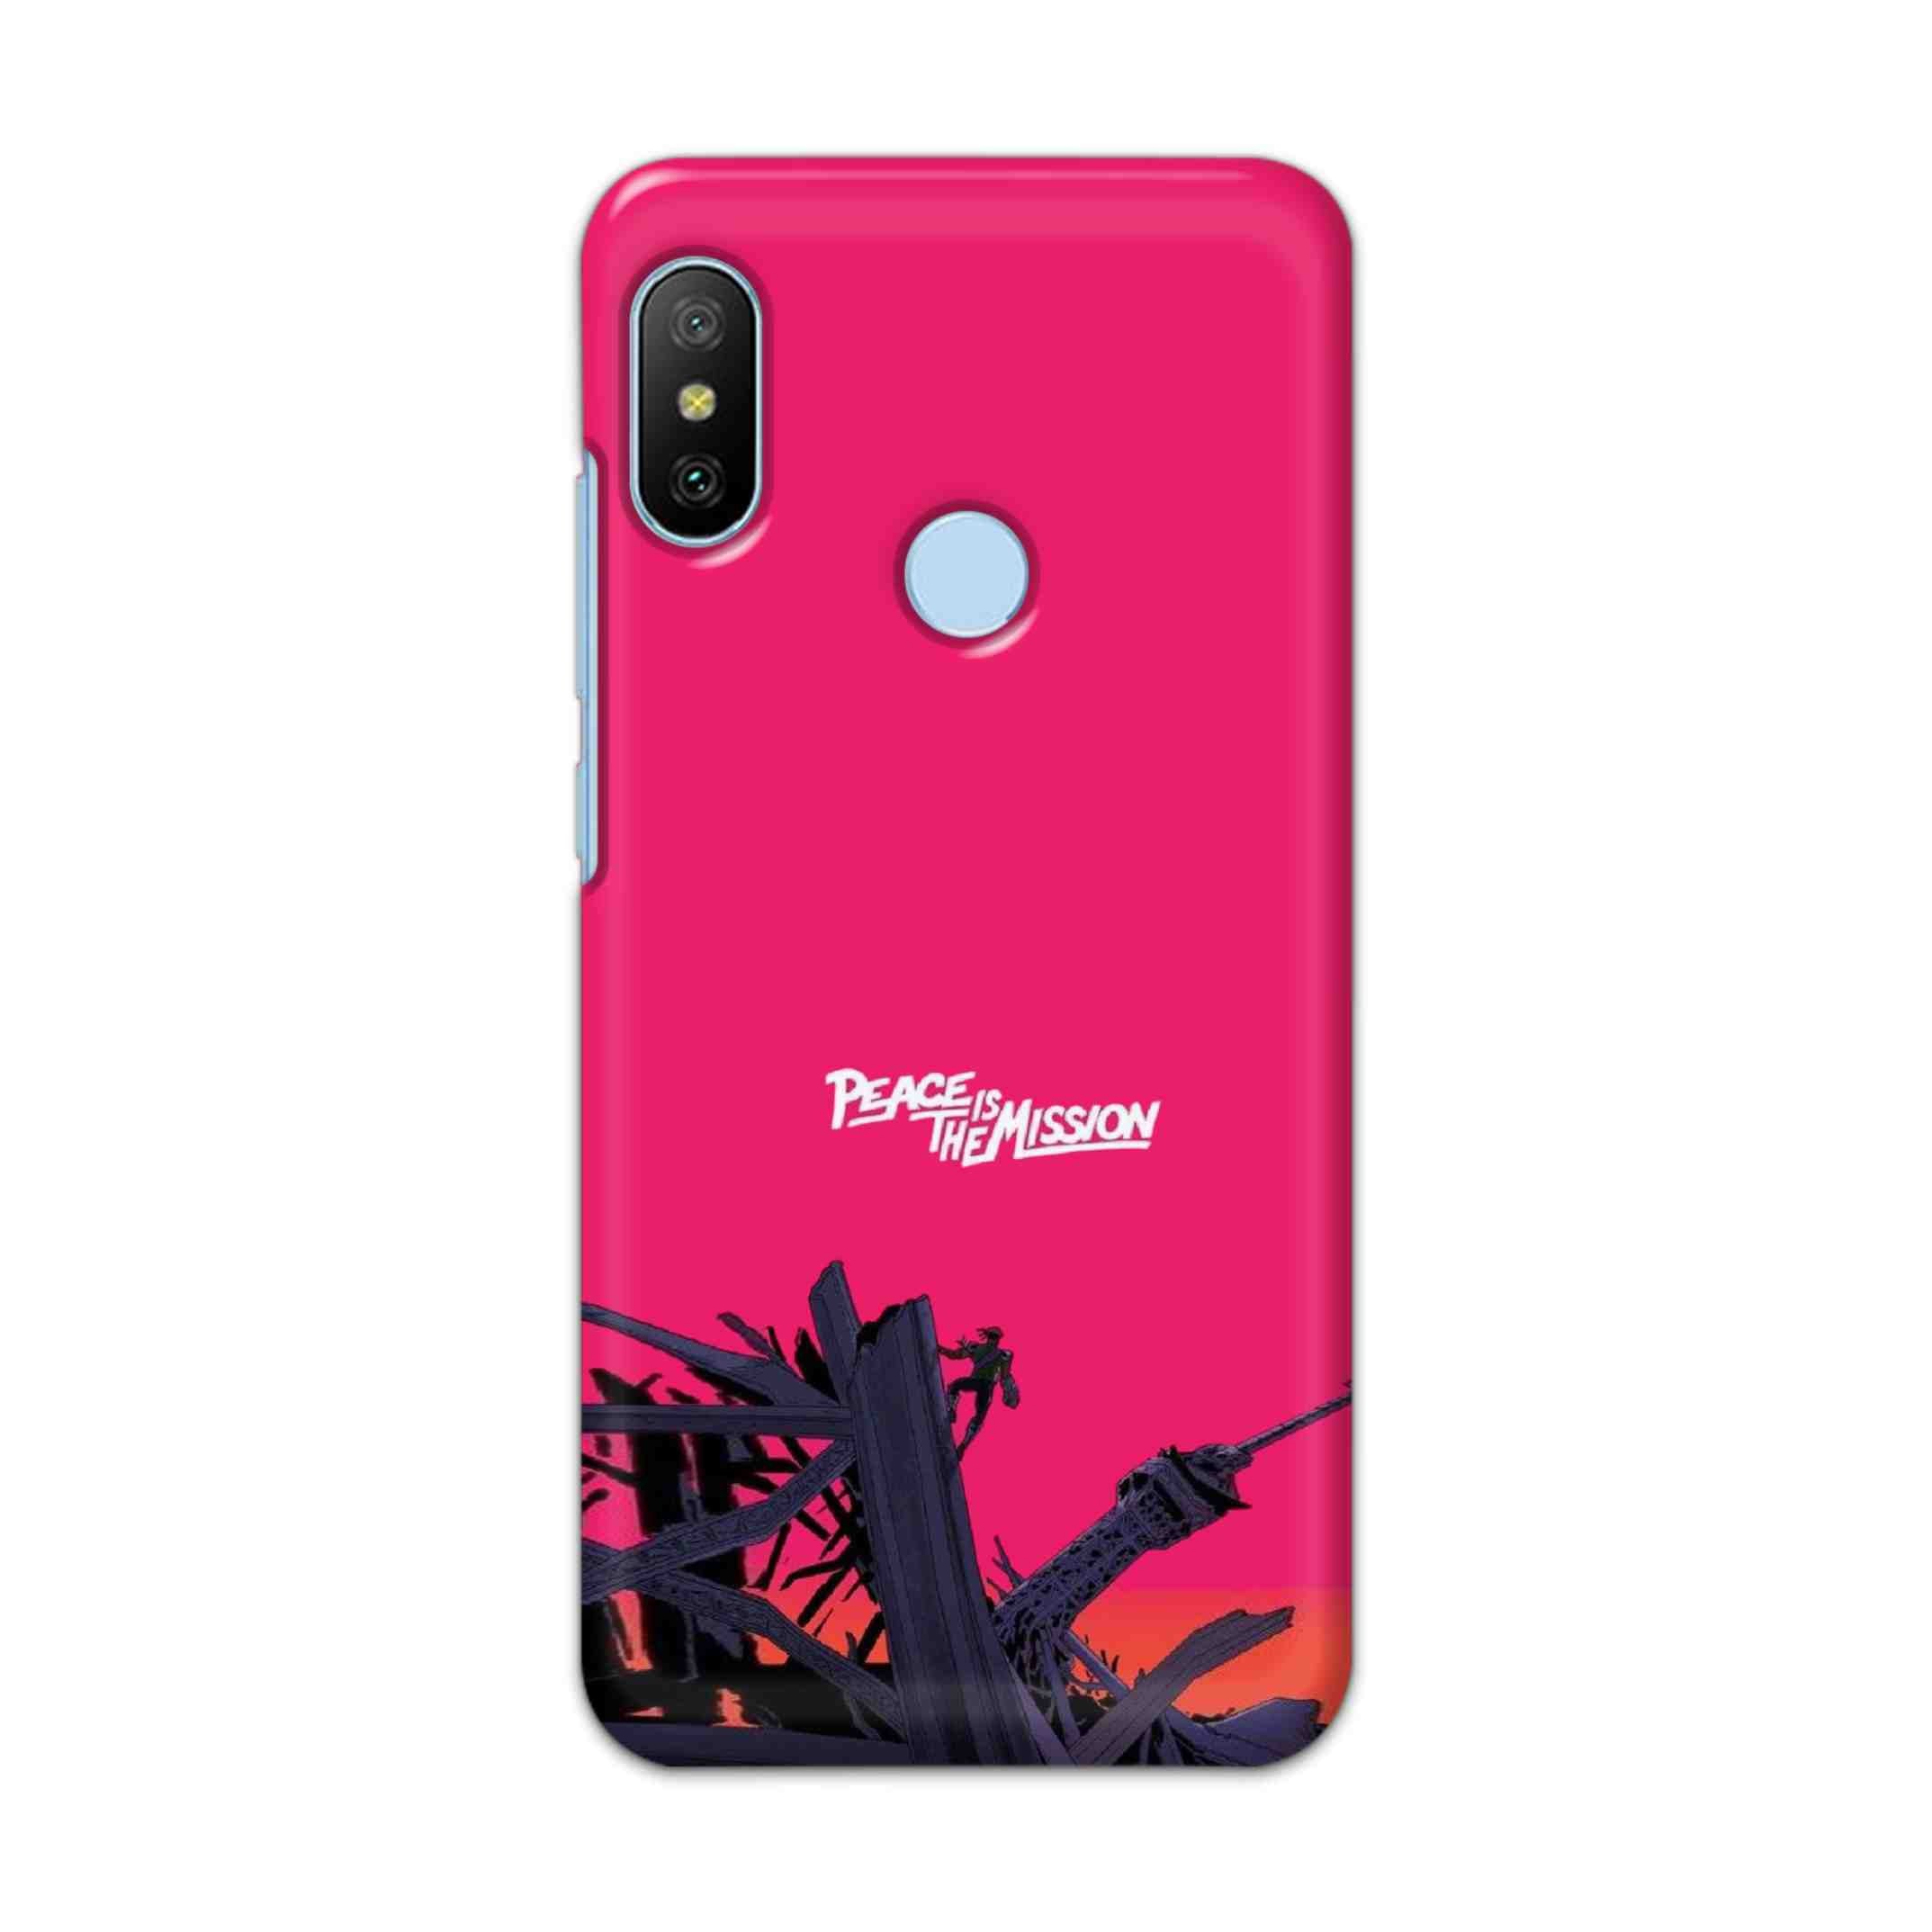 Buy Peace Is The Mission Hard Back Mobile Phone Case/Cover For Xiaomi A2 / 6X Online